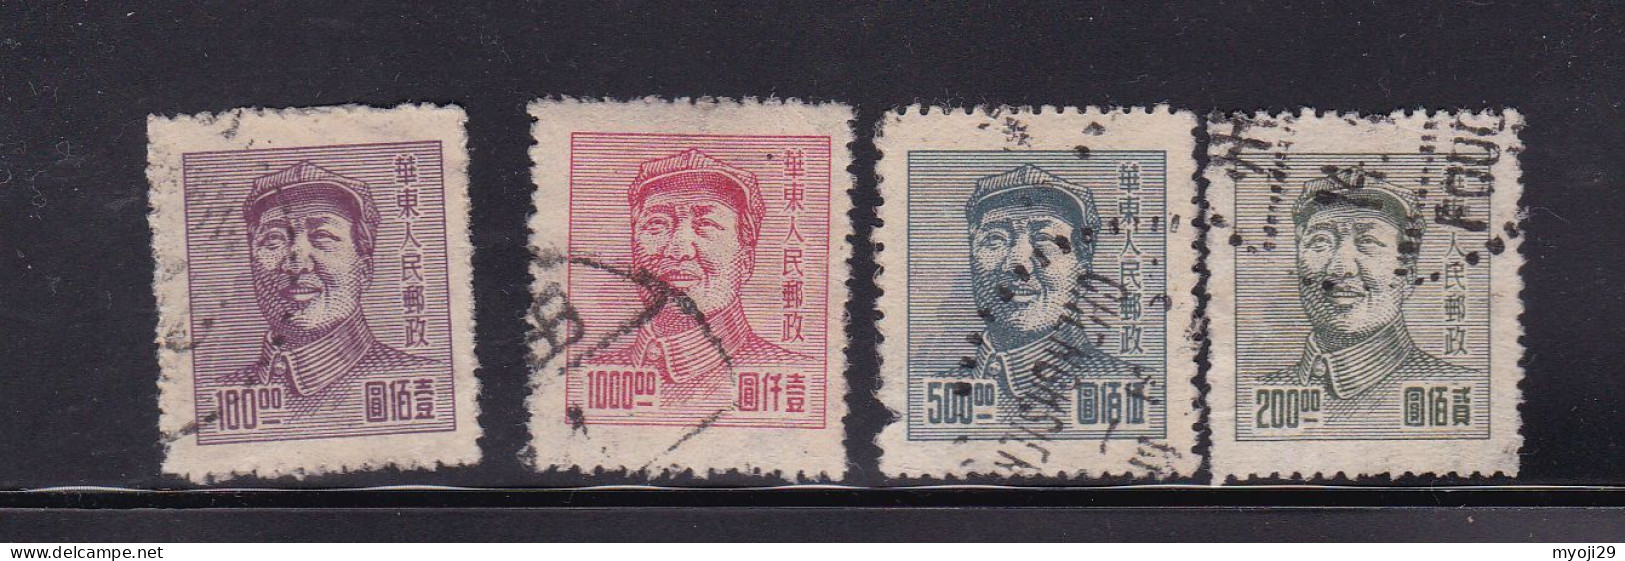 East China 1949 Mao Tse-tung $100,$200,$500,$1000 Used Stamps - Used Stamps